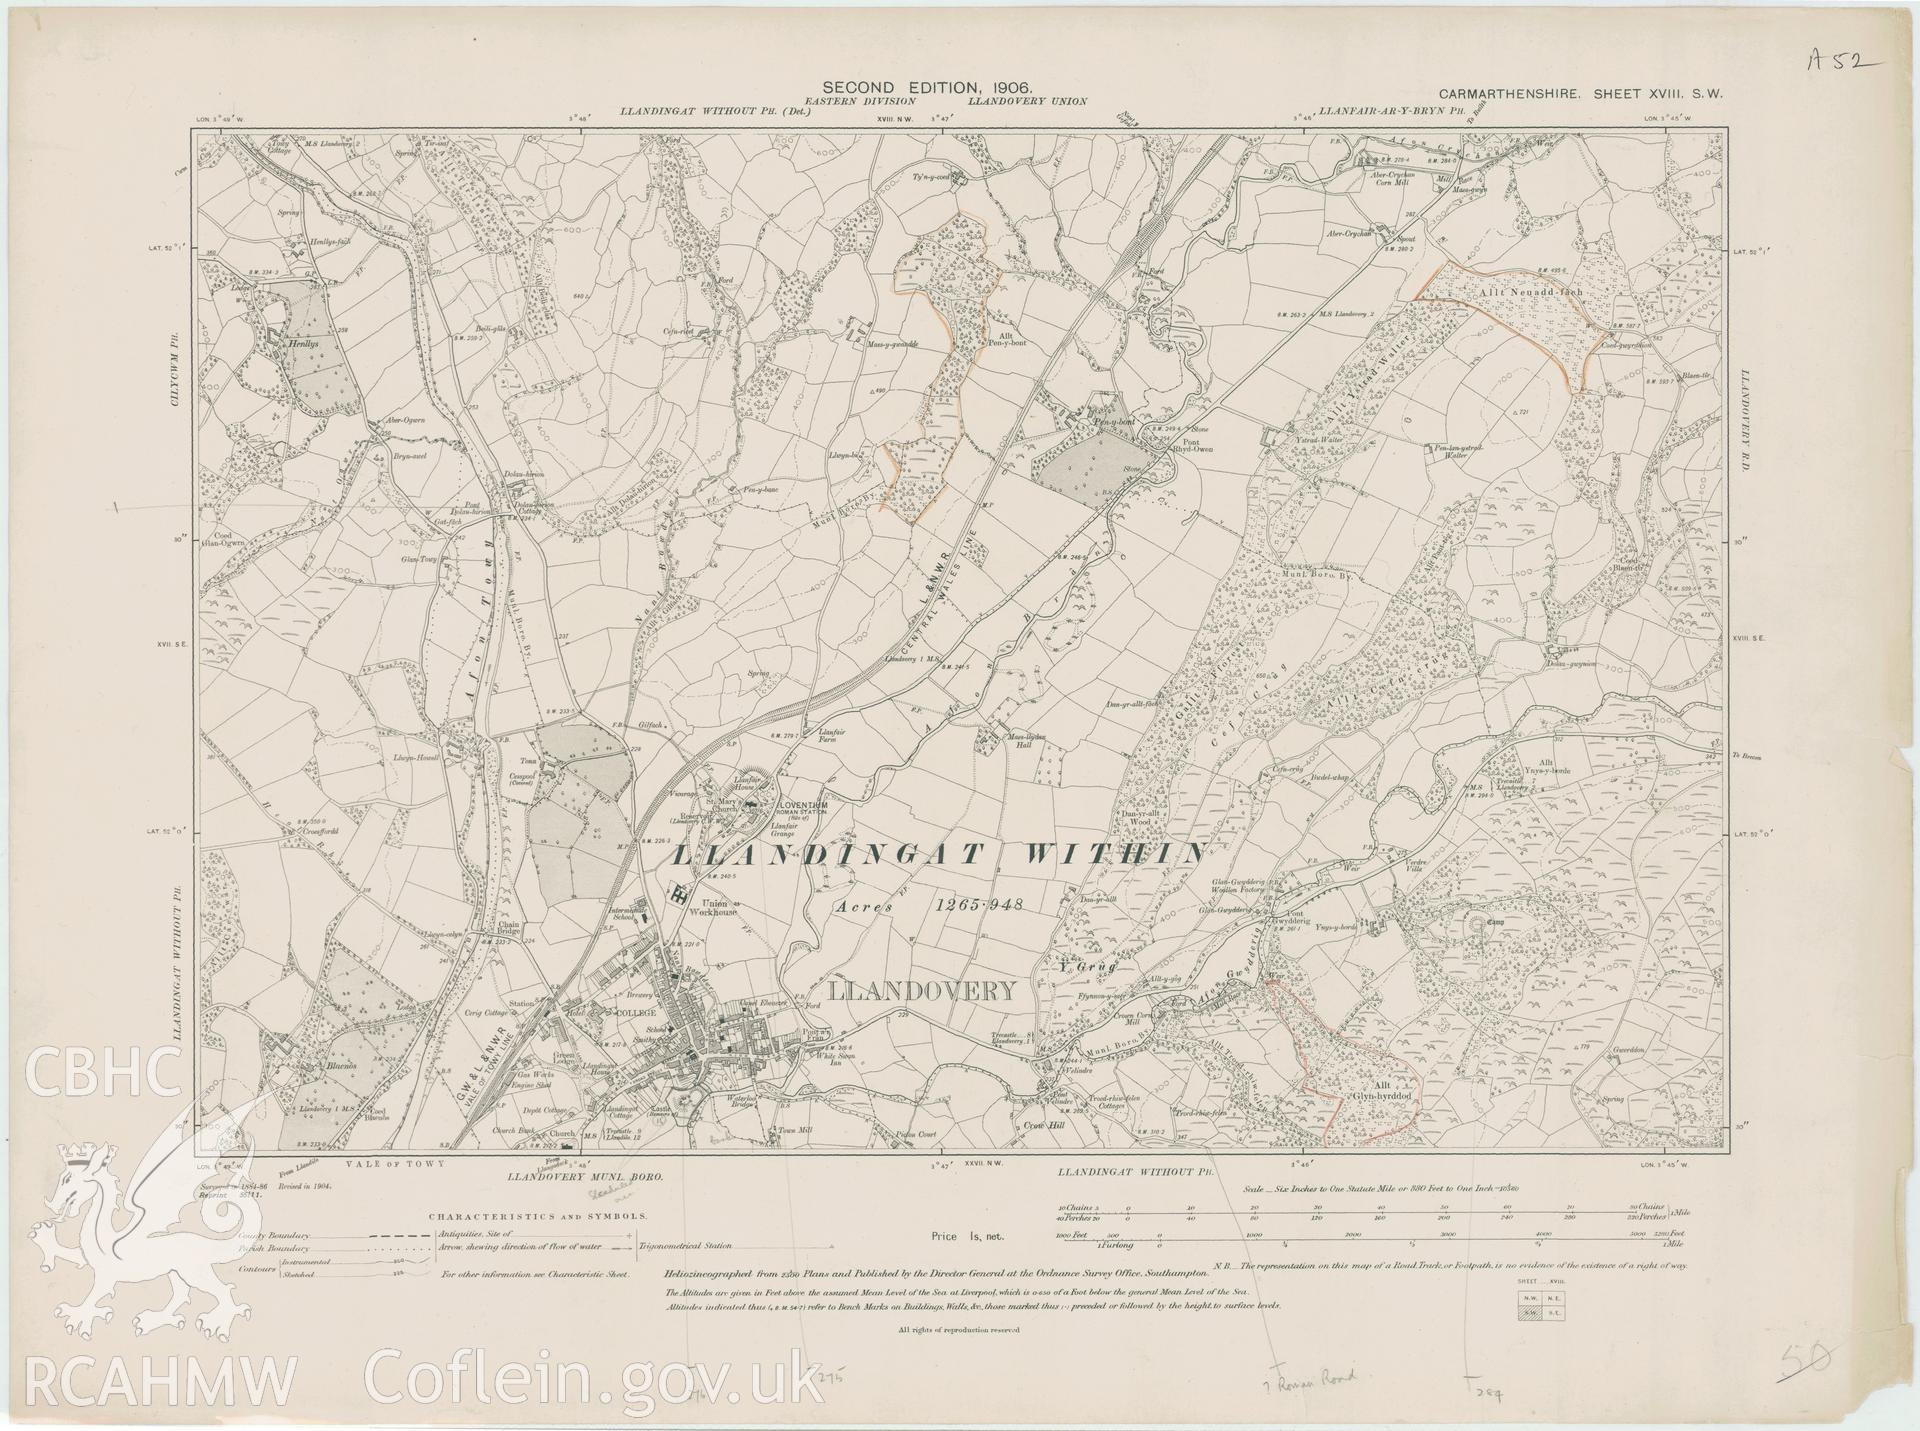 Second Edition 1906 Ordnance Survey map covering the Llandovery area